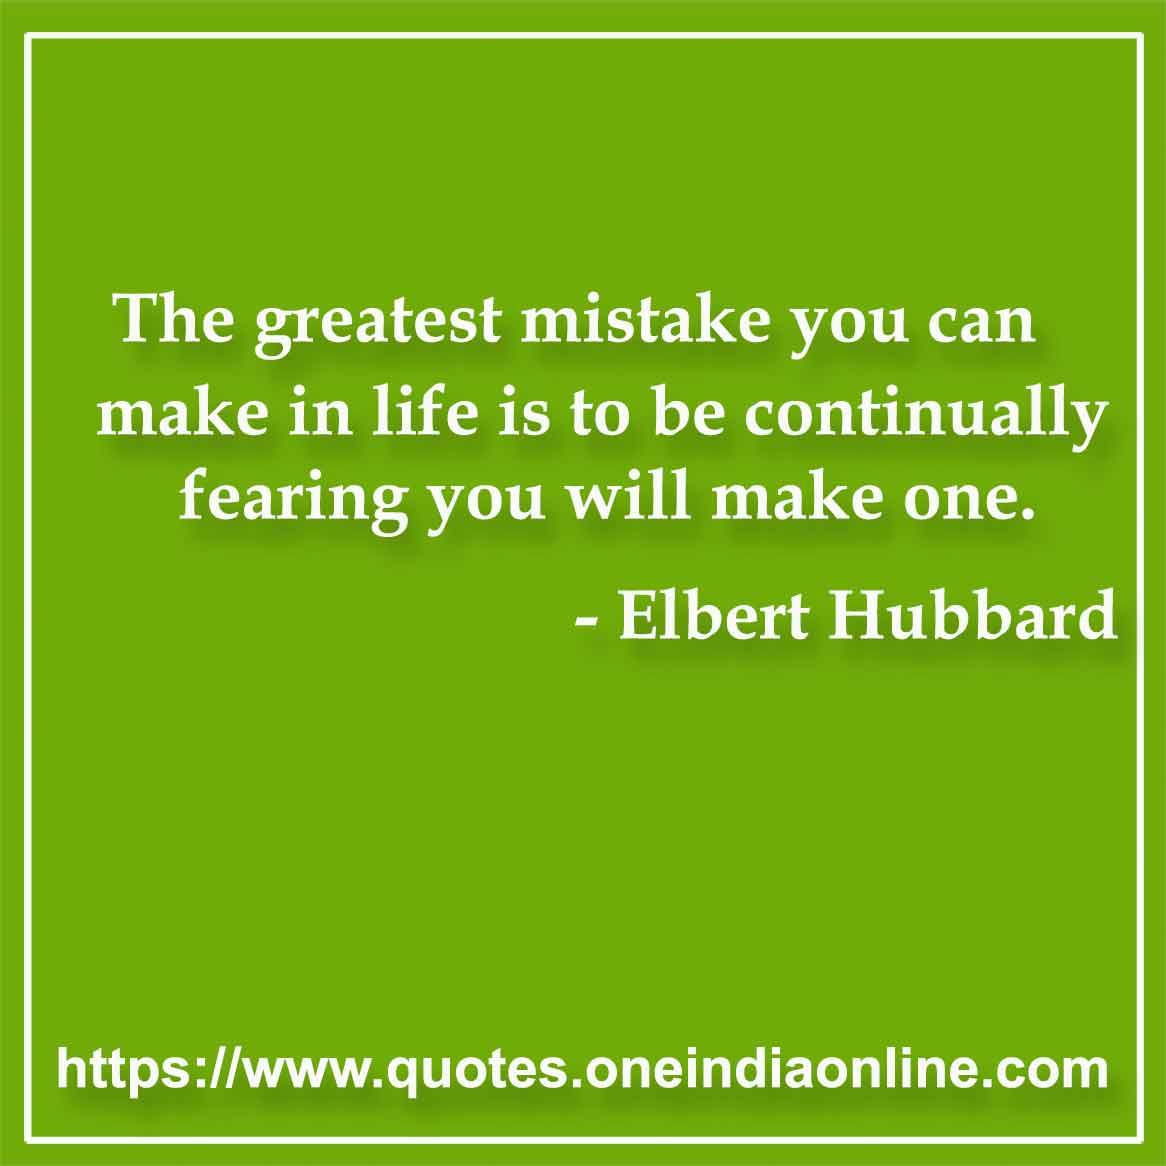 The greatest mistake you can make in life is to be continually fearing you will make one. 

- Elbert Hubbard 